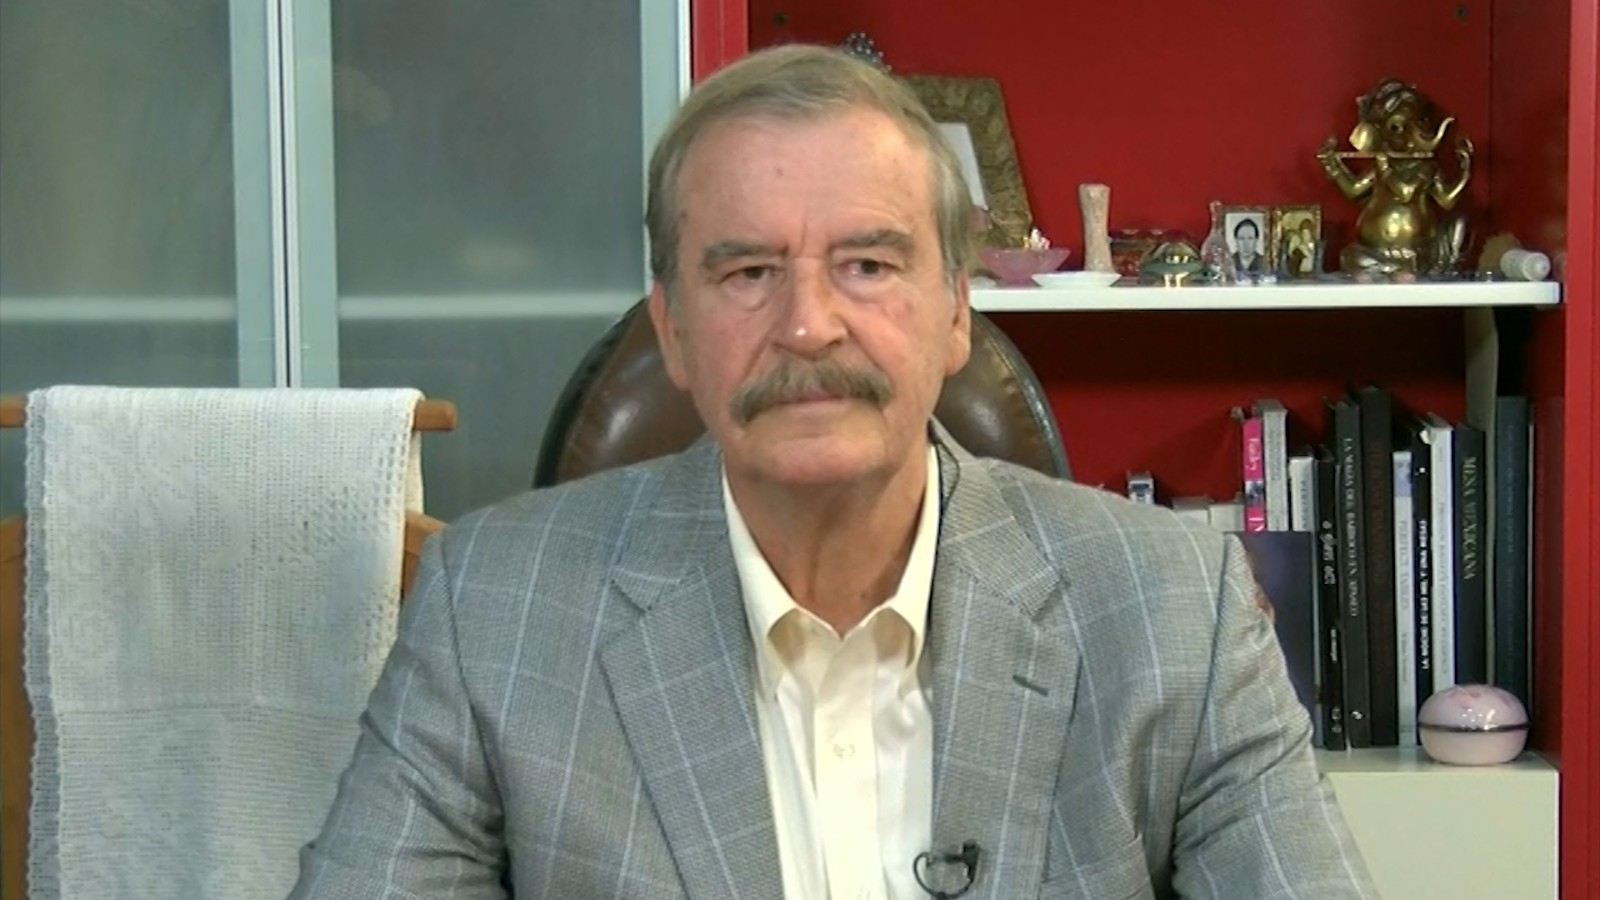 Vicente Fox Trump Is Absolutely Crazy Cnn Video